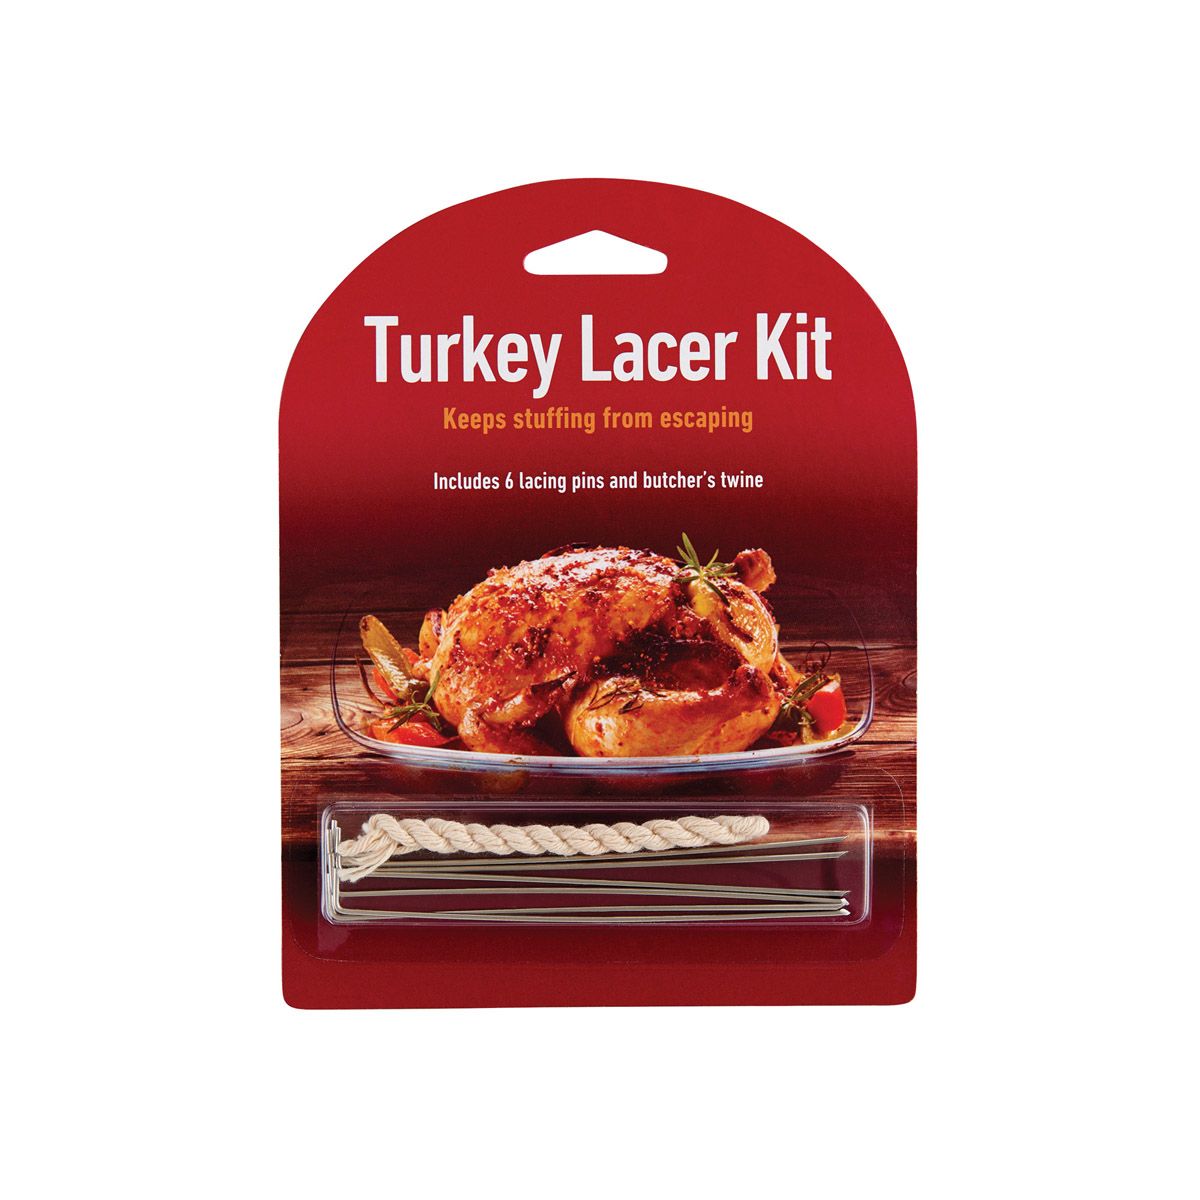 turkey lacer kit in its packaging.